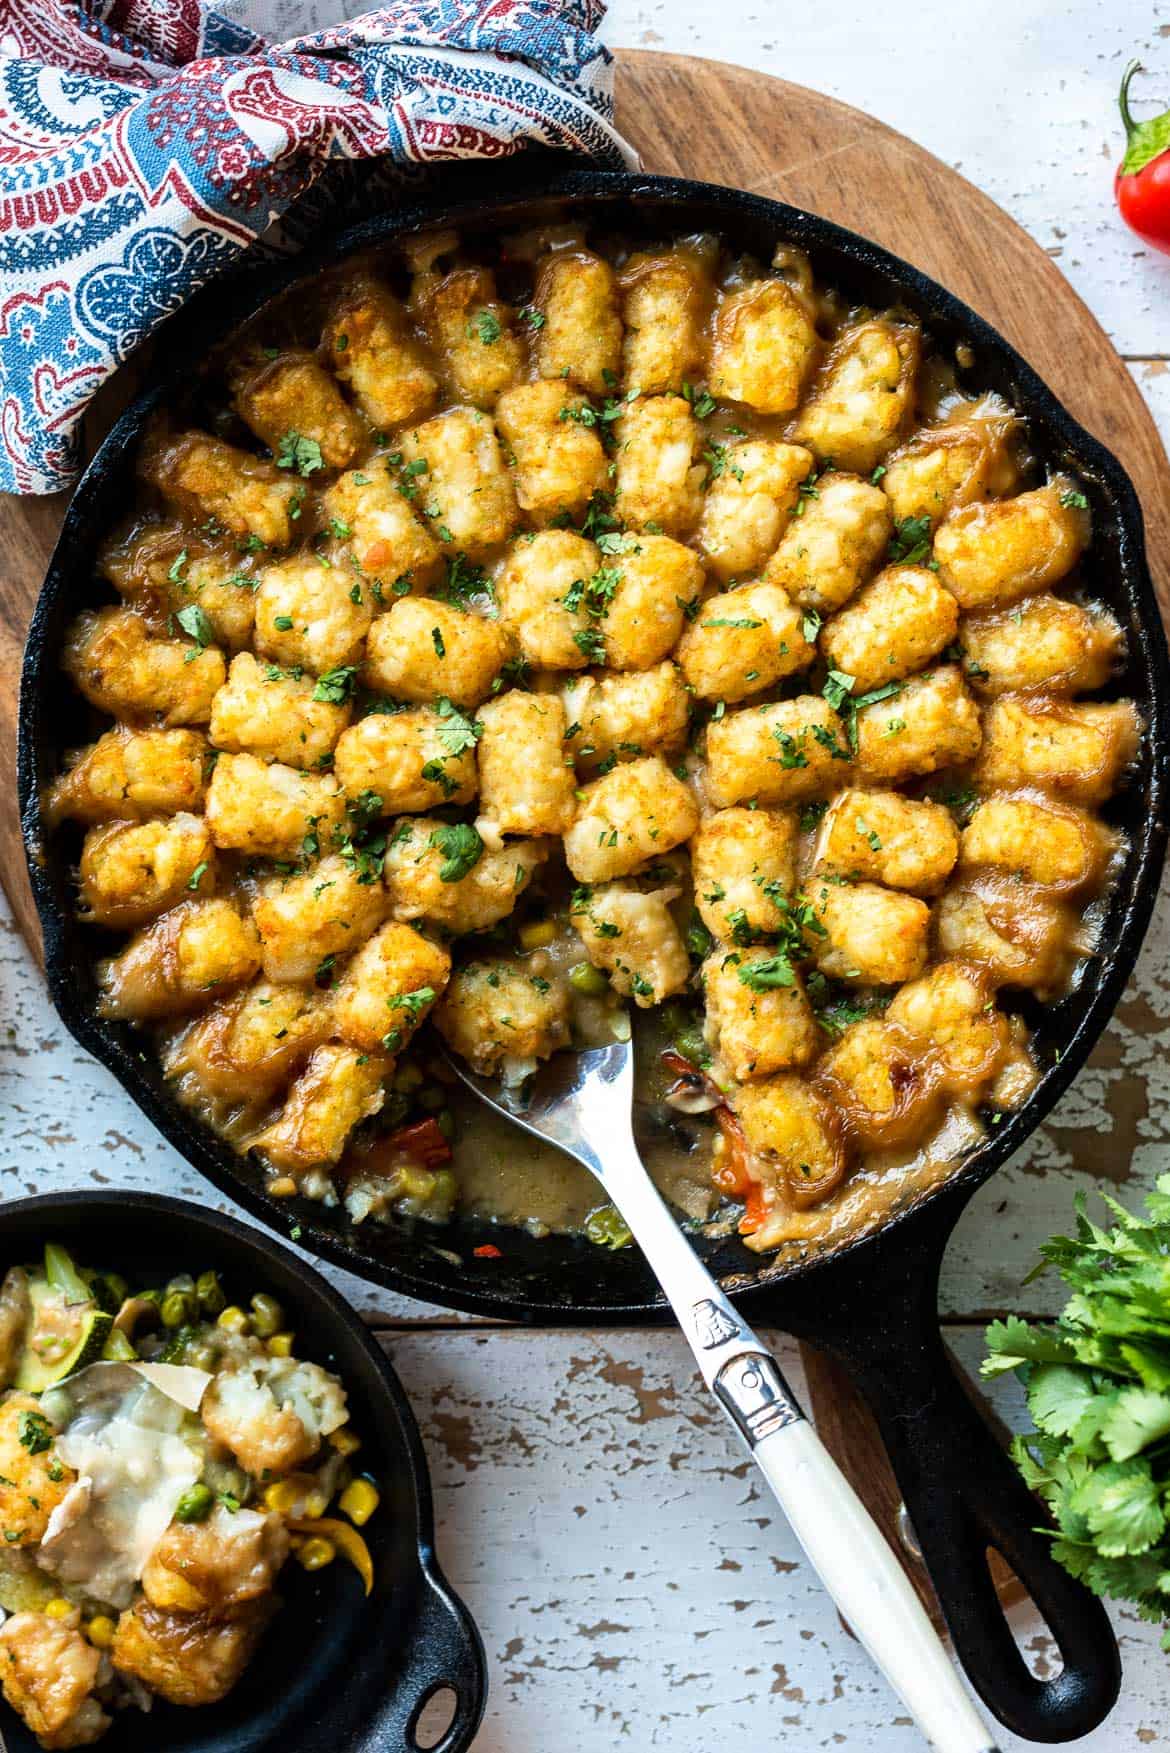 Vegetarian Tater Tot Casserole With